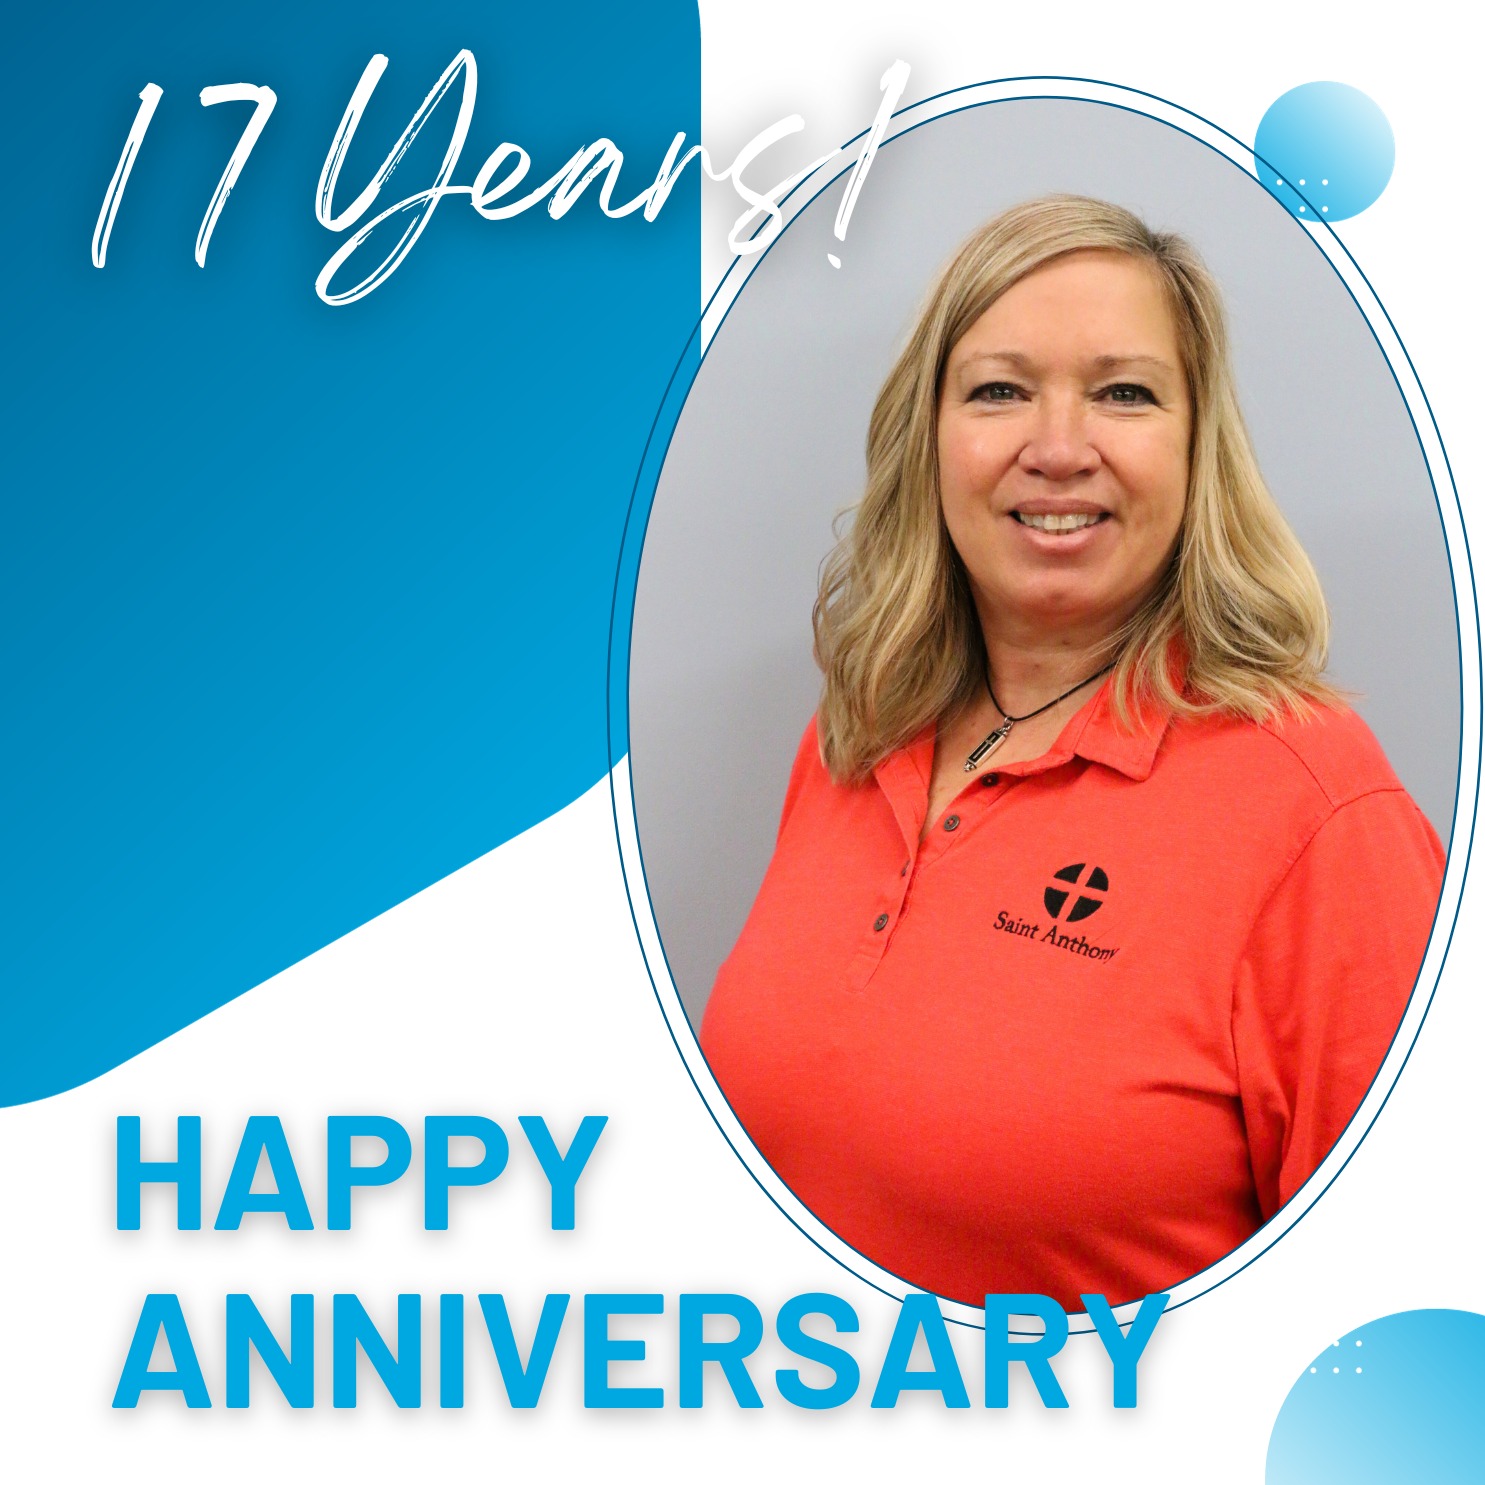 ðŸŽ‰âœ¨ Celebrating 17 Years of Excellence! ðŸŽŠ Today, we extend our heartfelt congratulations to Chalone Robbins, our  Activities Director. Chalone has brought joy, creativity, and passion to our community, making every day special for our residents. ðŸŒŸ